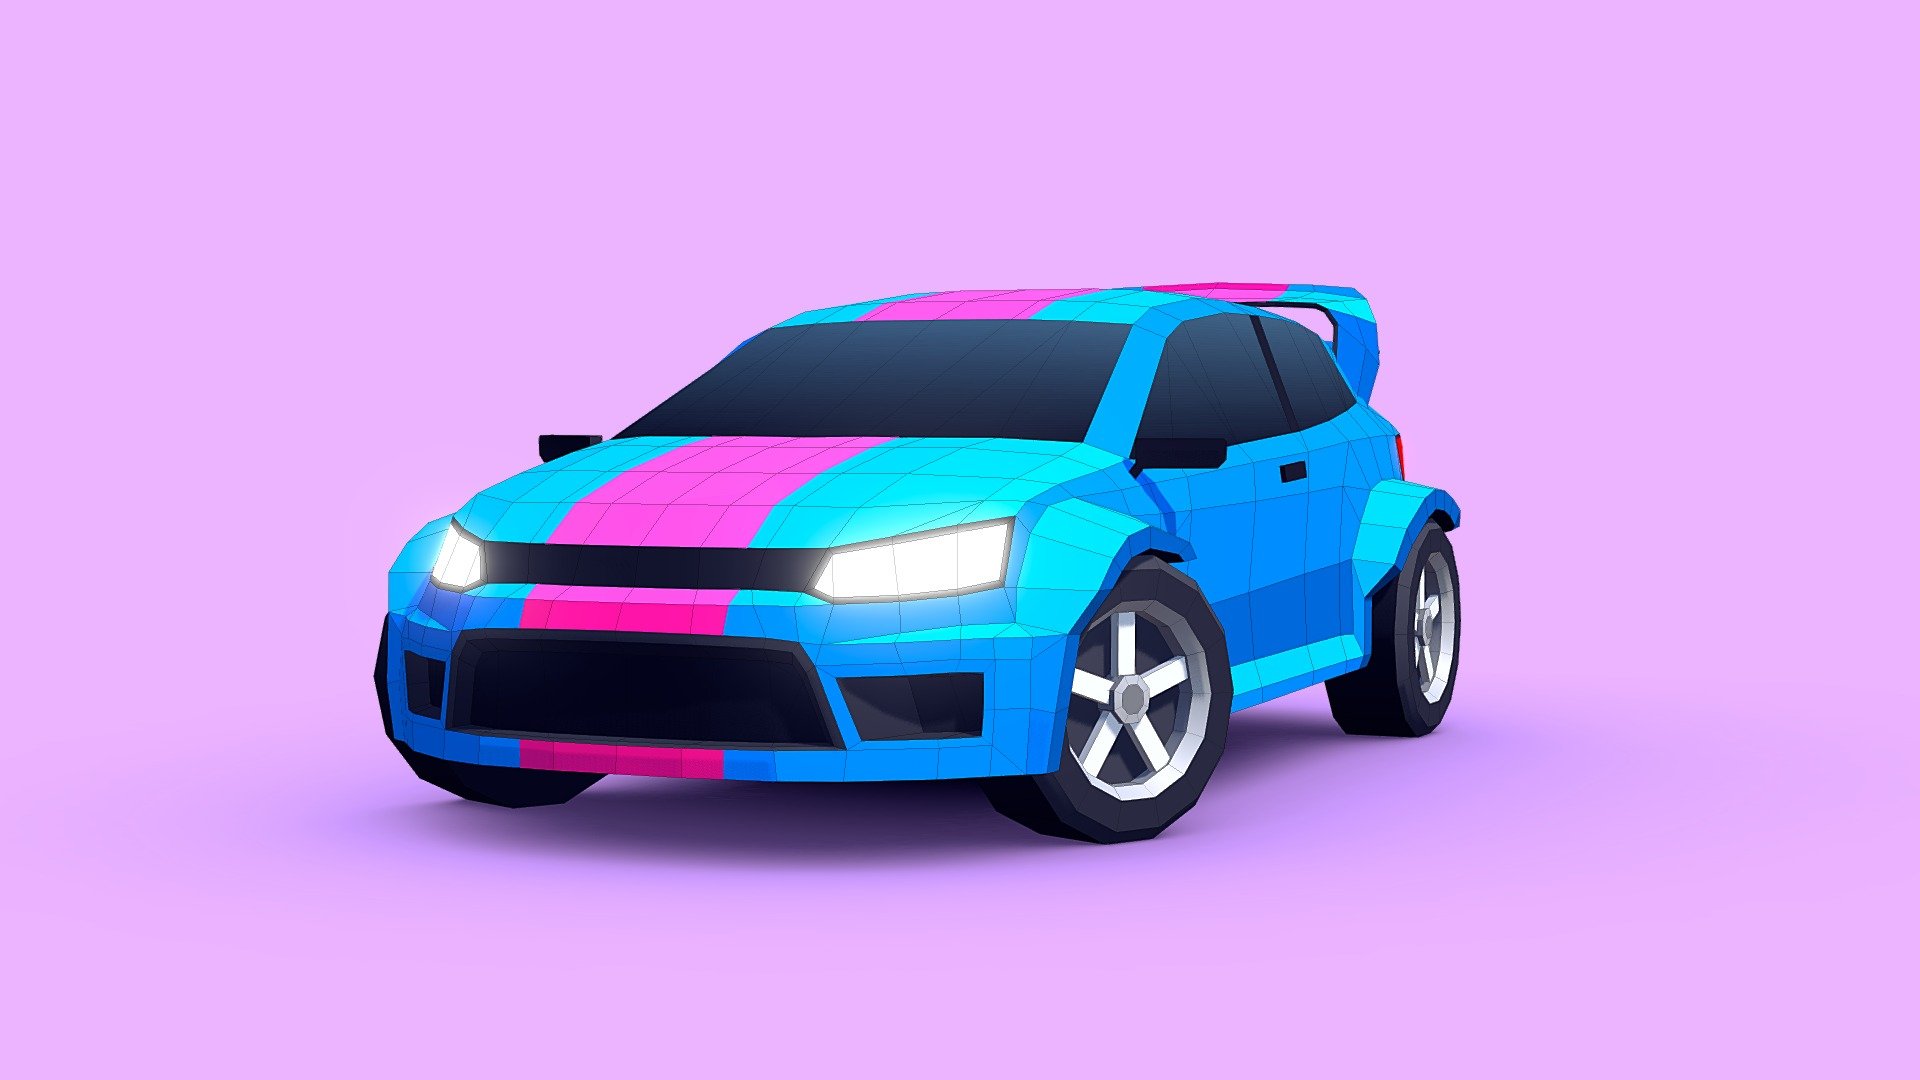 This will be included in the October update of my asset, Ultimate Low Poly Cars.

This pack is available in the Unity Asset Store and Sketchfab 3d model